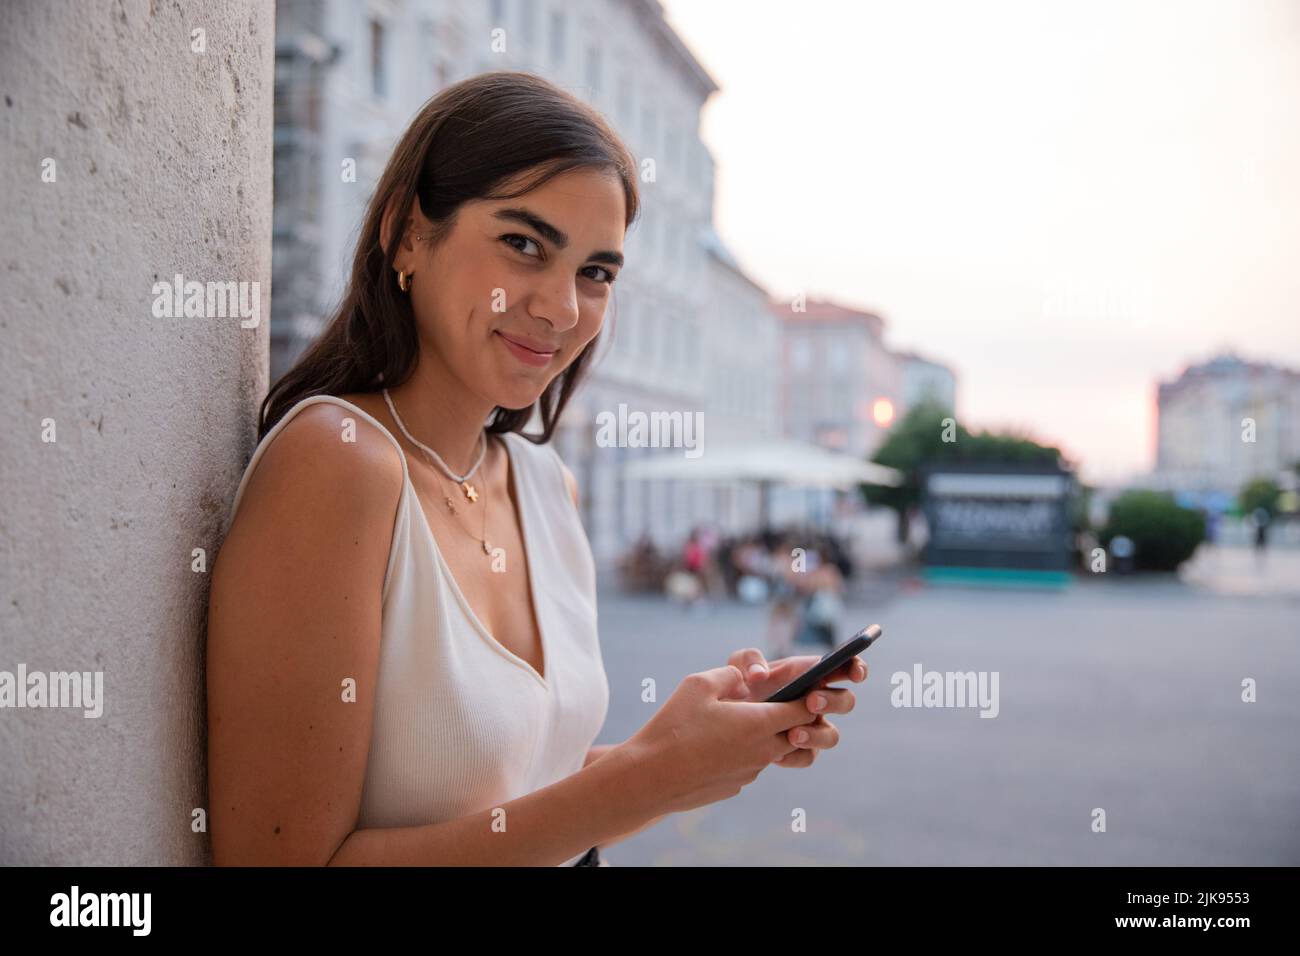 Young girl in town leaning against a pole messages with her cell phone. Stock Photo